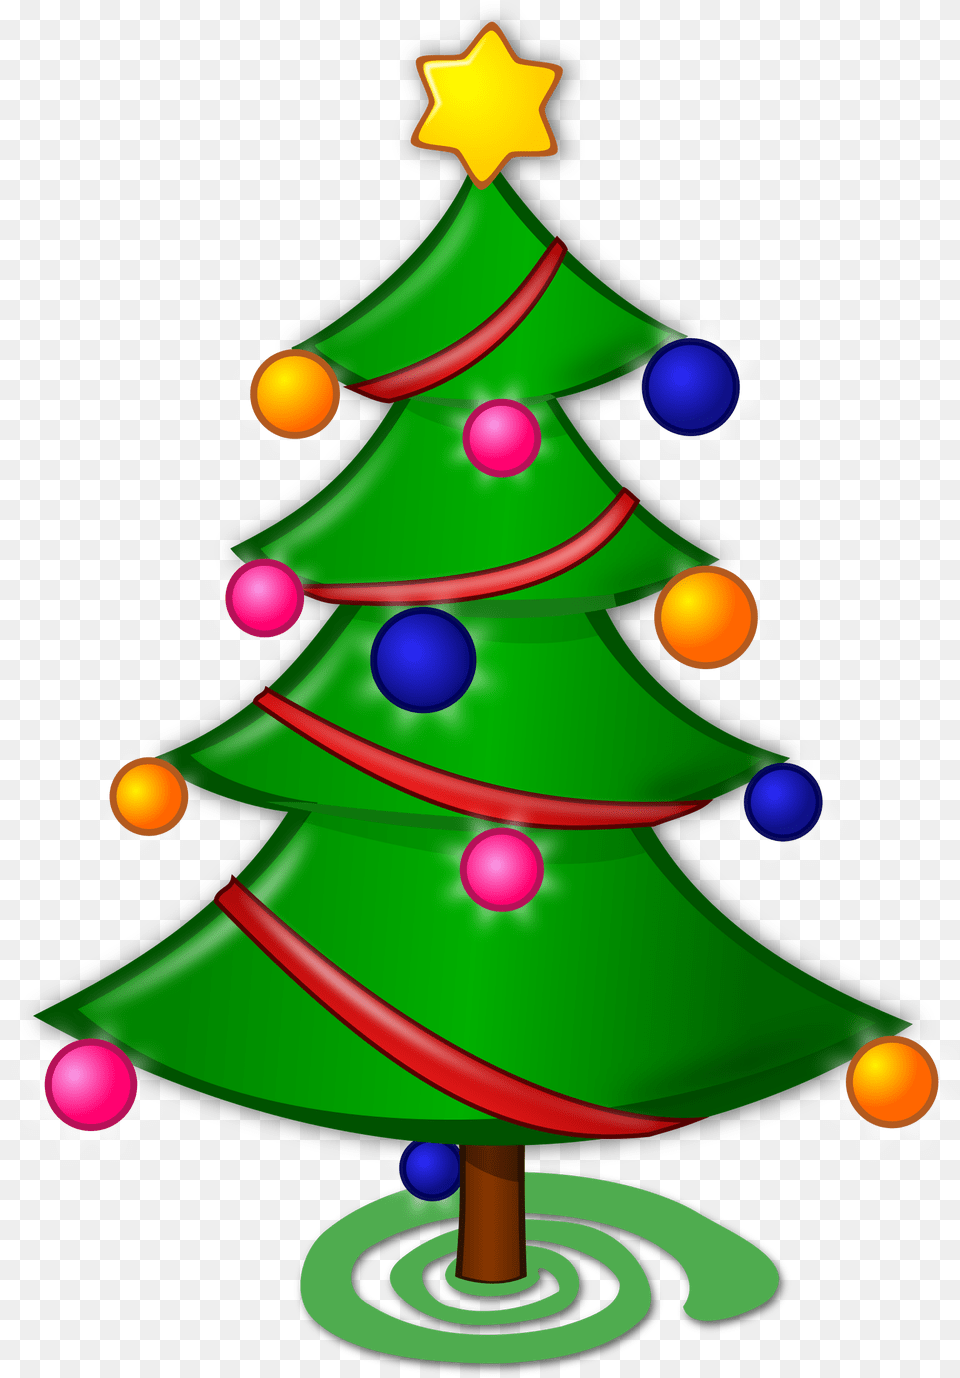 Transparent Christmas Tree Clipart 0 Merry Christmas Tree Drawing, Christmas Decorations, Festival, Nature, Outdoors Png Image